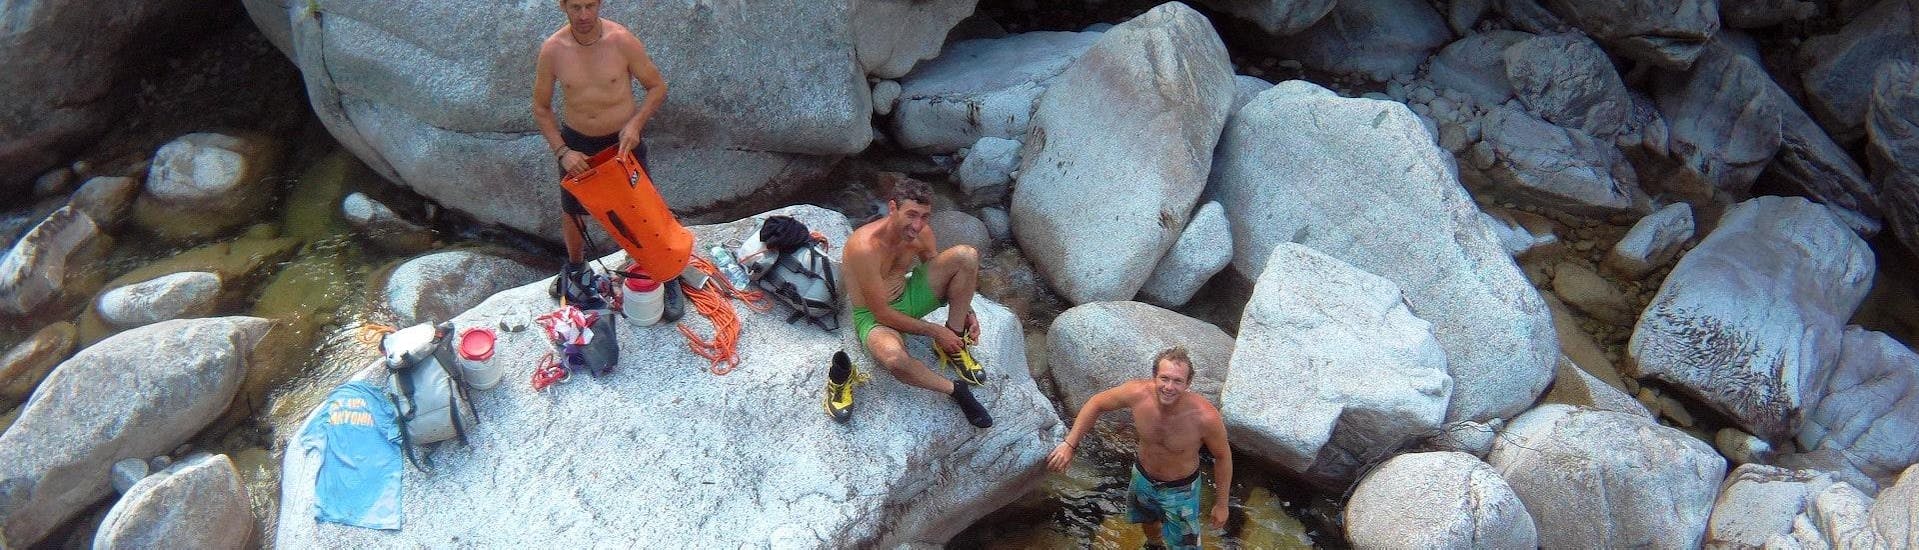 Three men are taking a break in the Canyon during their Sporty Full Day Canyoning in Canyon de Fiumorbu with Acqua et Natura.